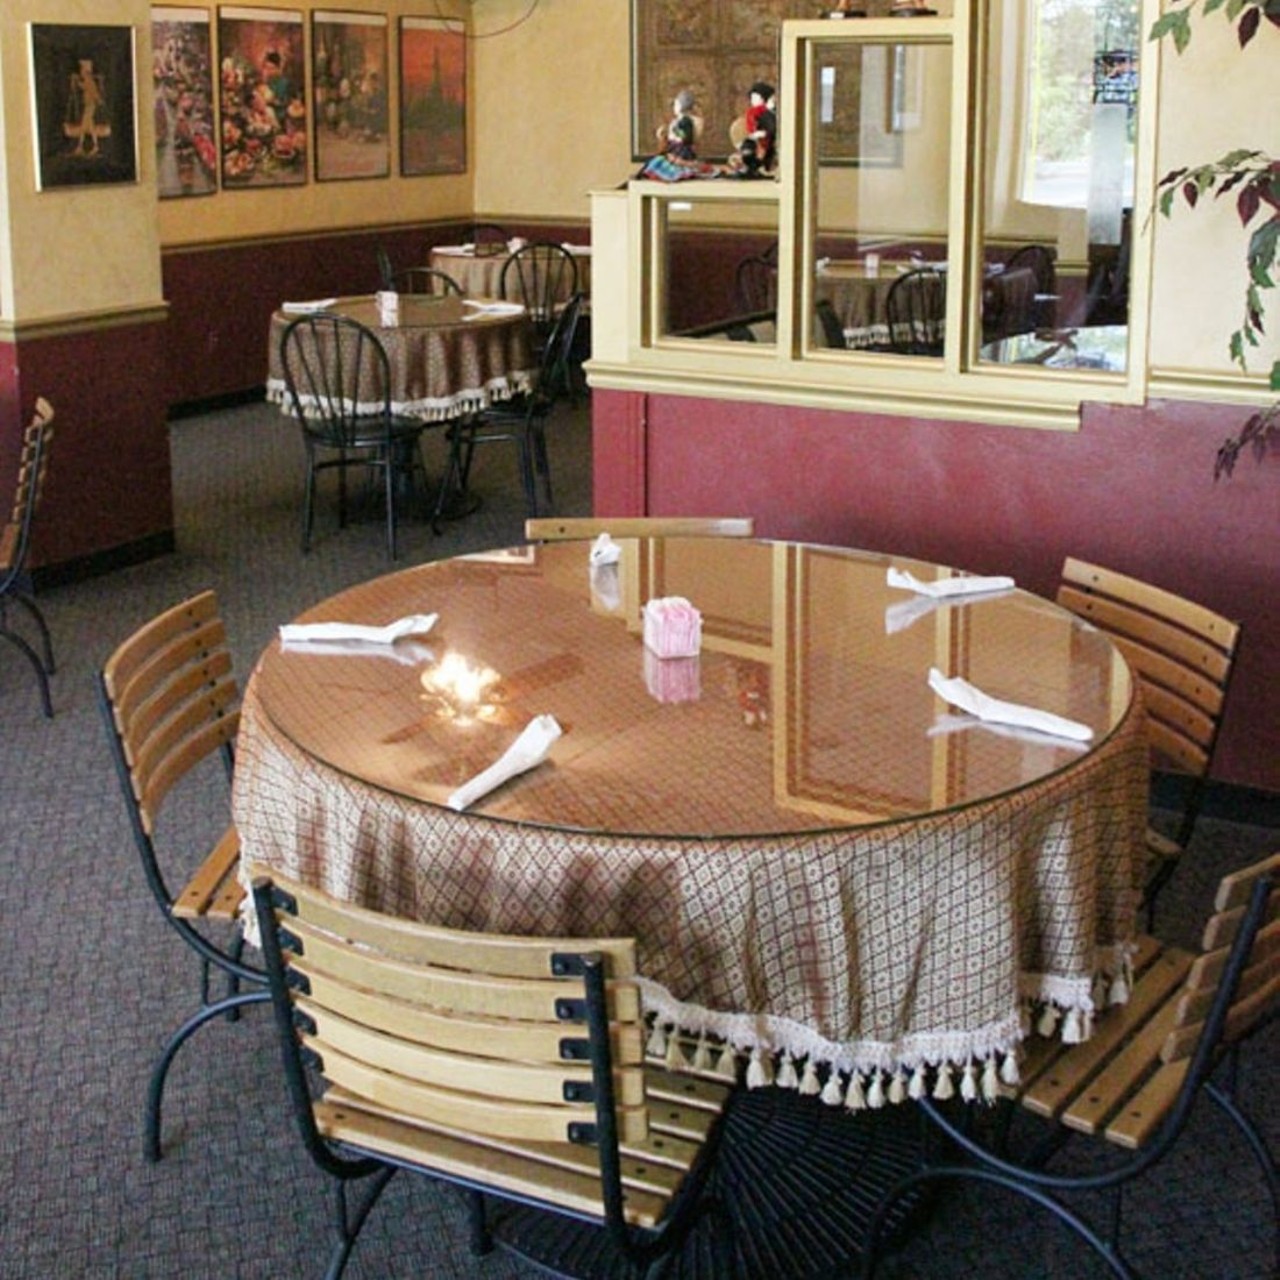 Thai House
(109 South Main Street; Columbia, IL; 618-281-2777)
Everyone in Columbia, Illinois knows that Thai House is the place to be for outstanding Thai food. Once you visit, you'll know, too.
Photo credit: RFT File Photo